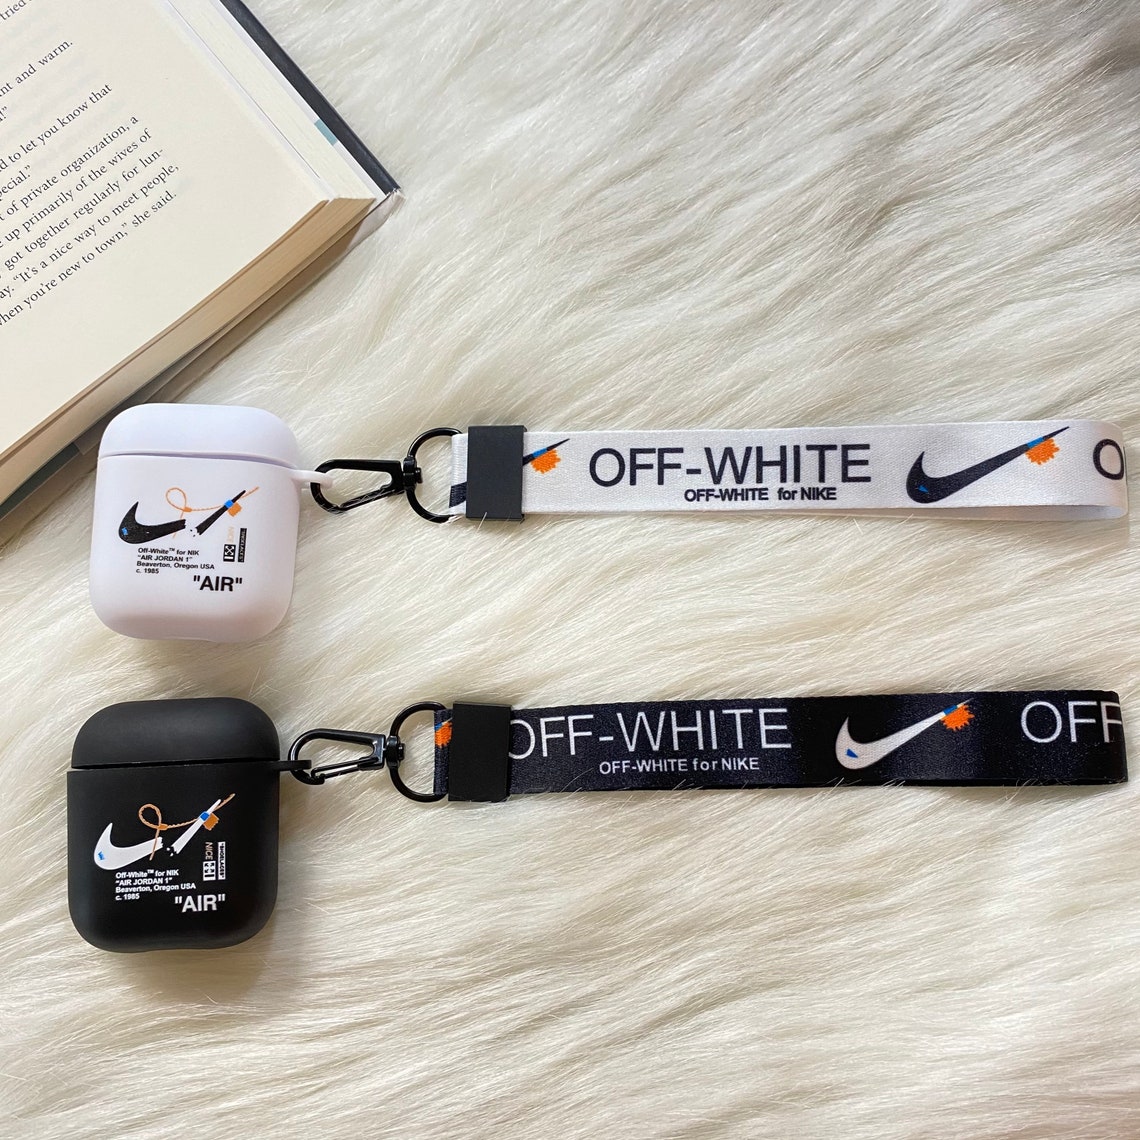 Airpods Case with White-Off Lanyard for Airpods Generation 1 & | Etsy